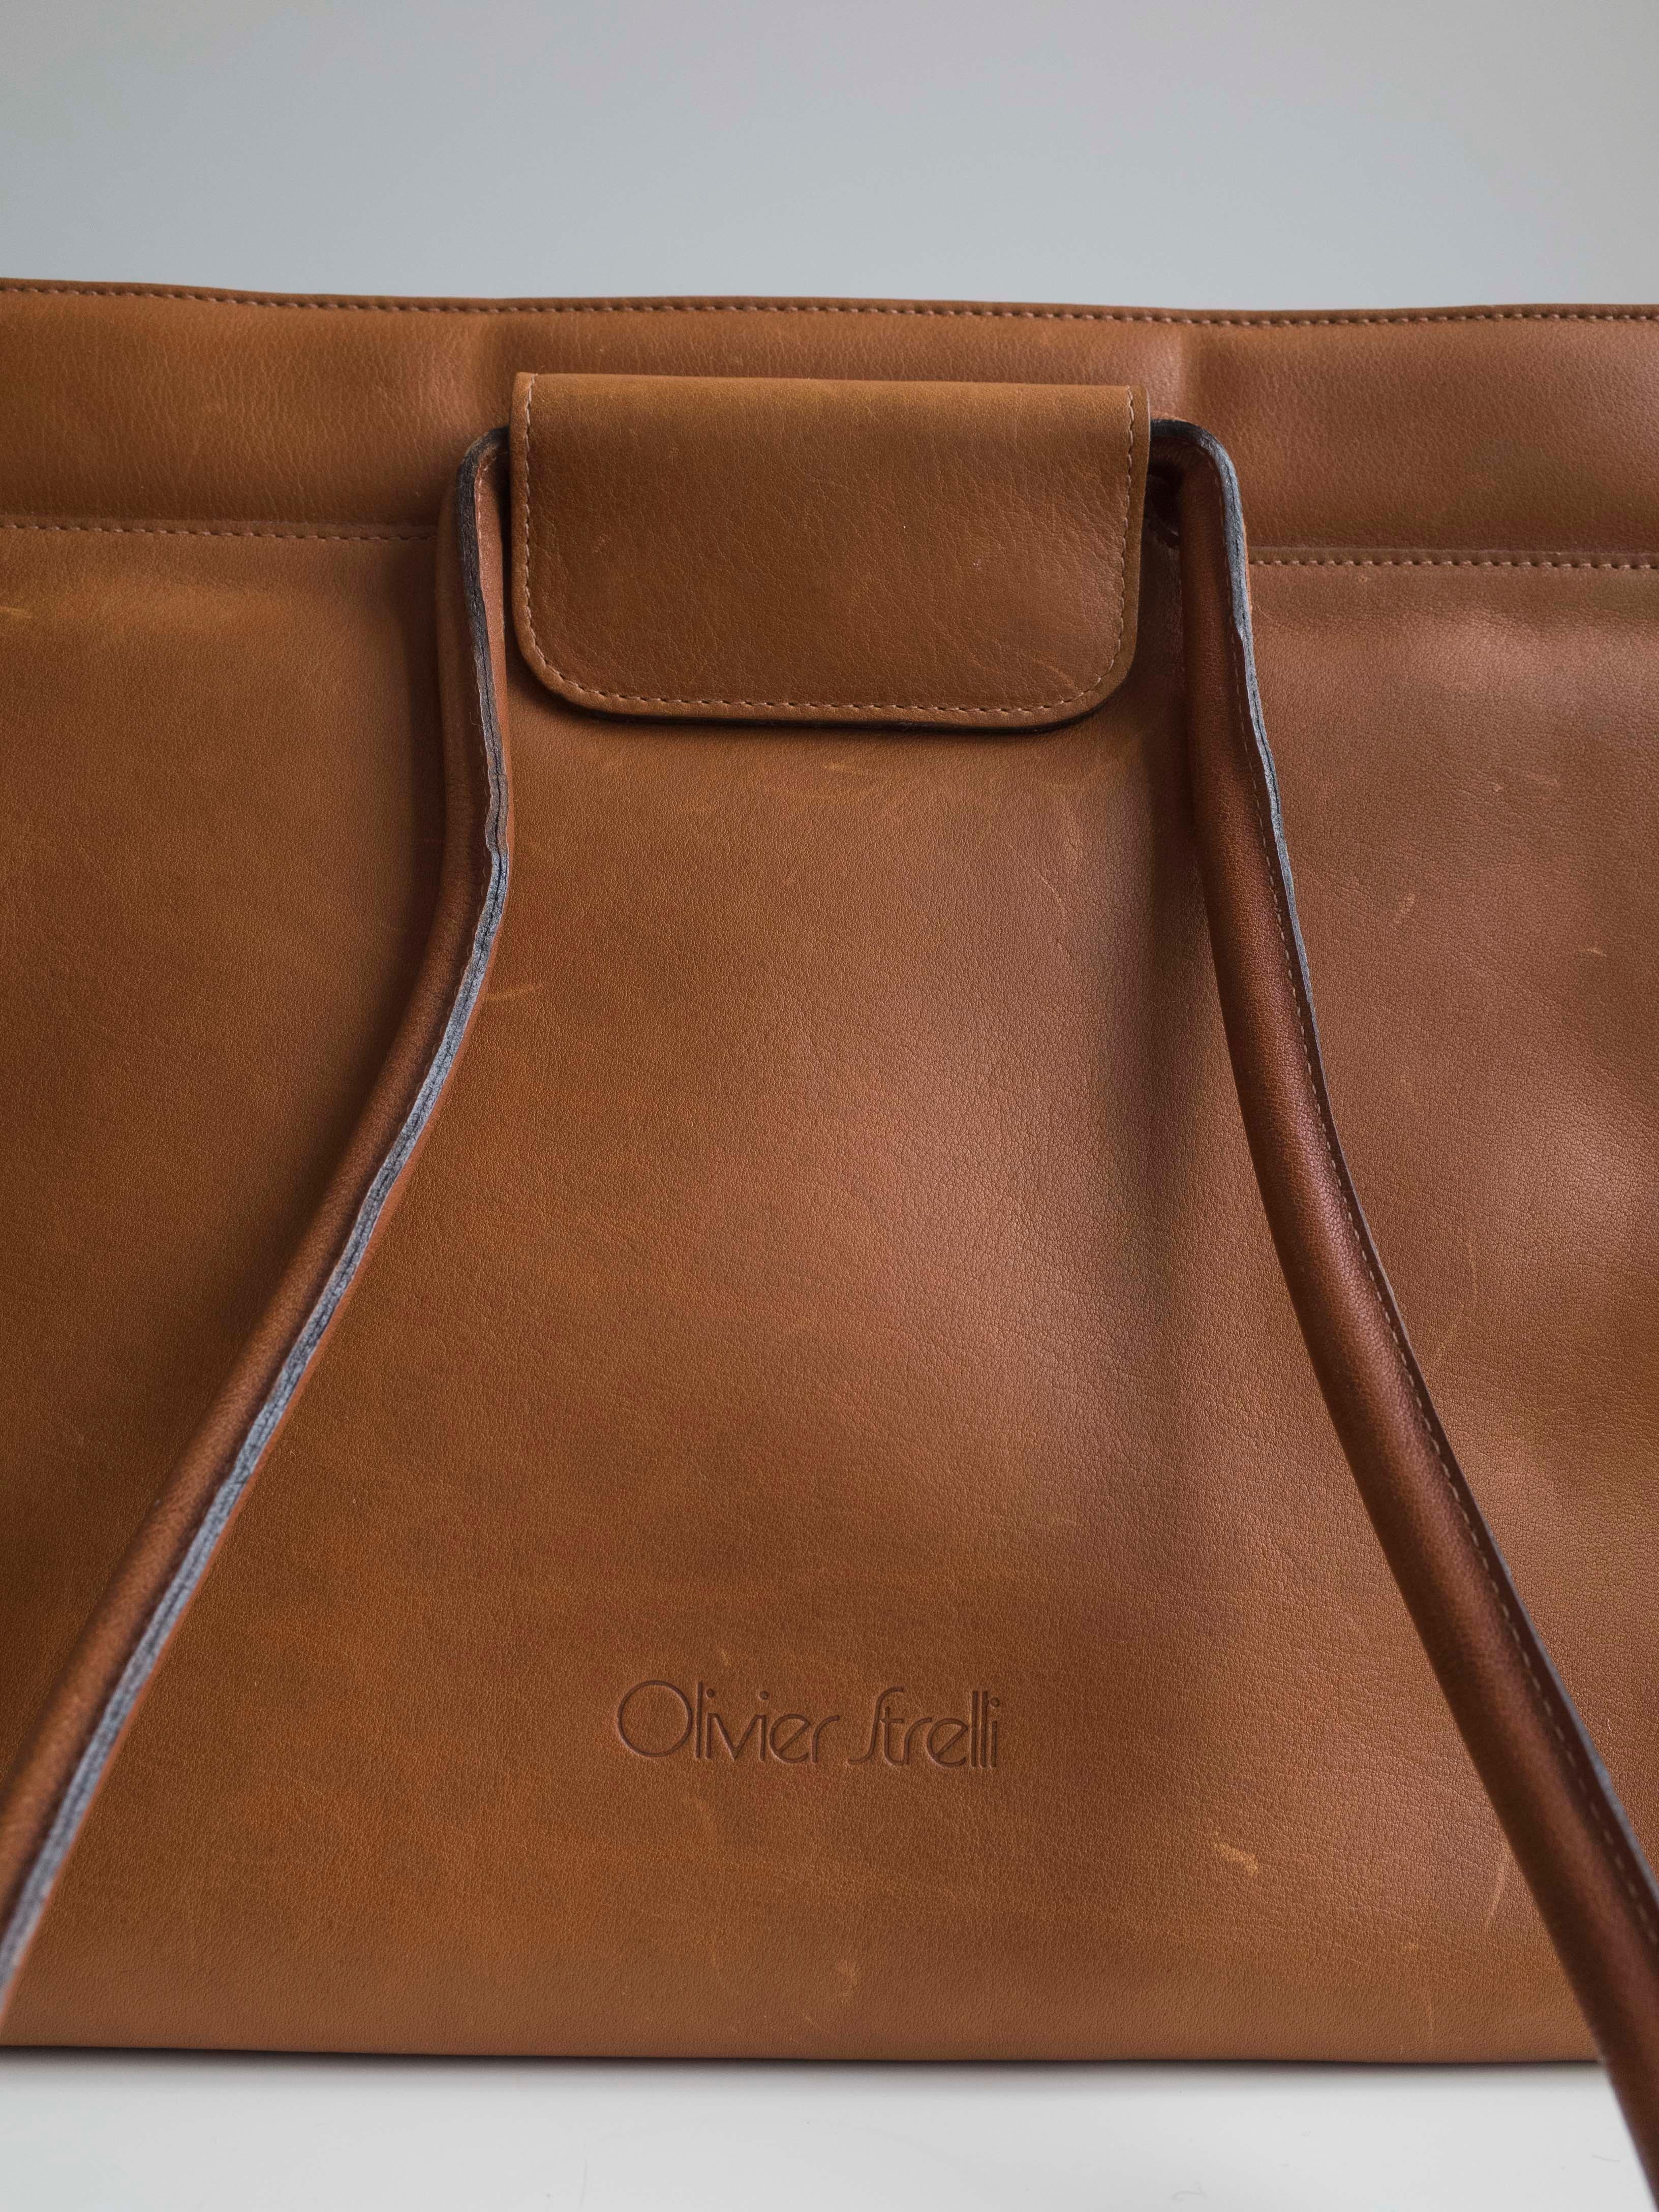 Vintage 1970s handbag by Olivier Strelli. Warm caramel coloured leather with matching top stitch. Embossed logo. Two corded leather straps. 
Double magnetic closure. 
The purse opens to a main leather compartment with a large zippered section. 
Soft